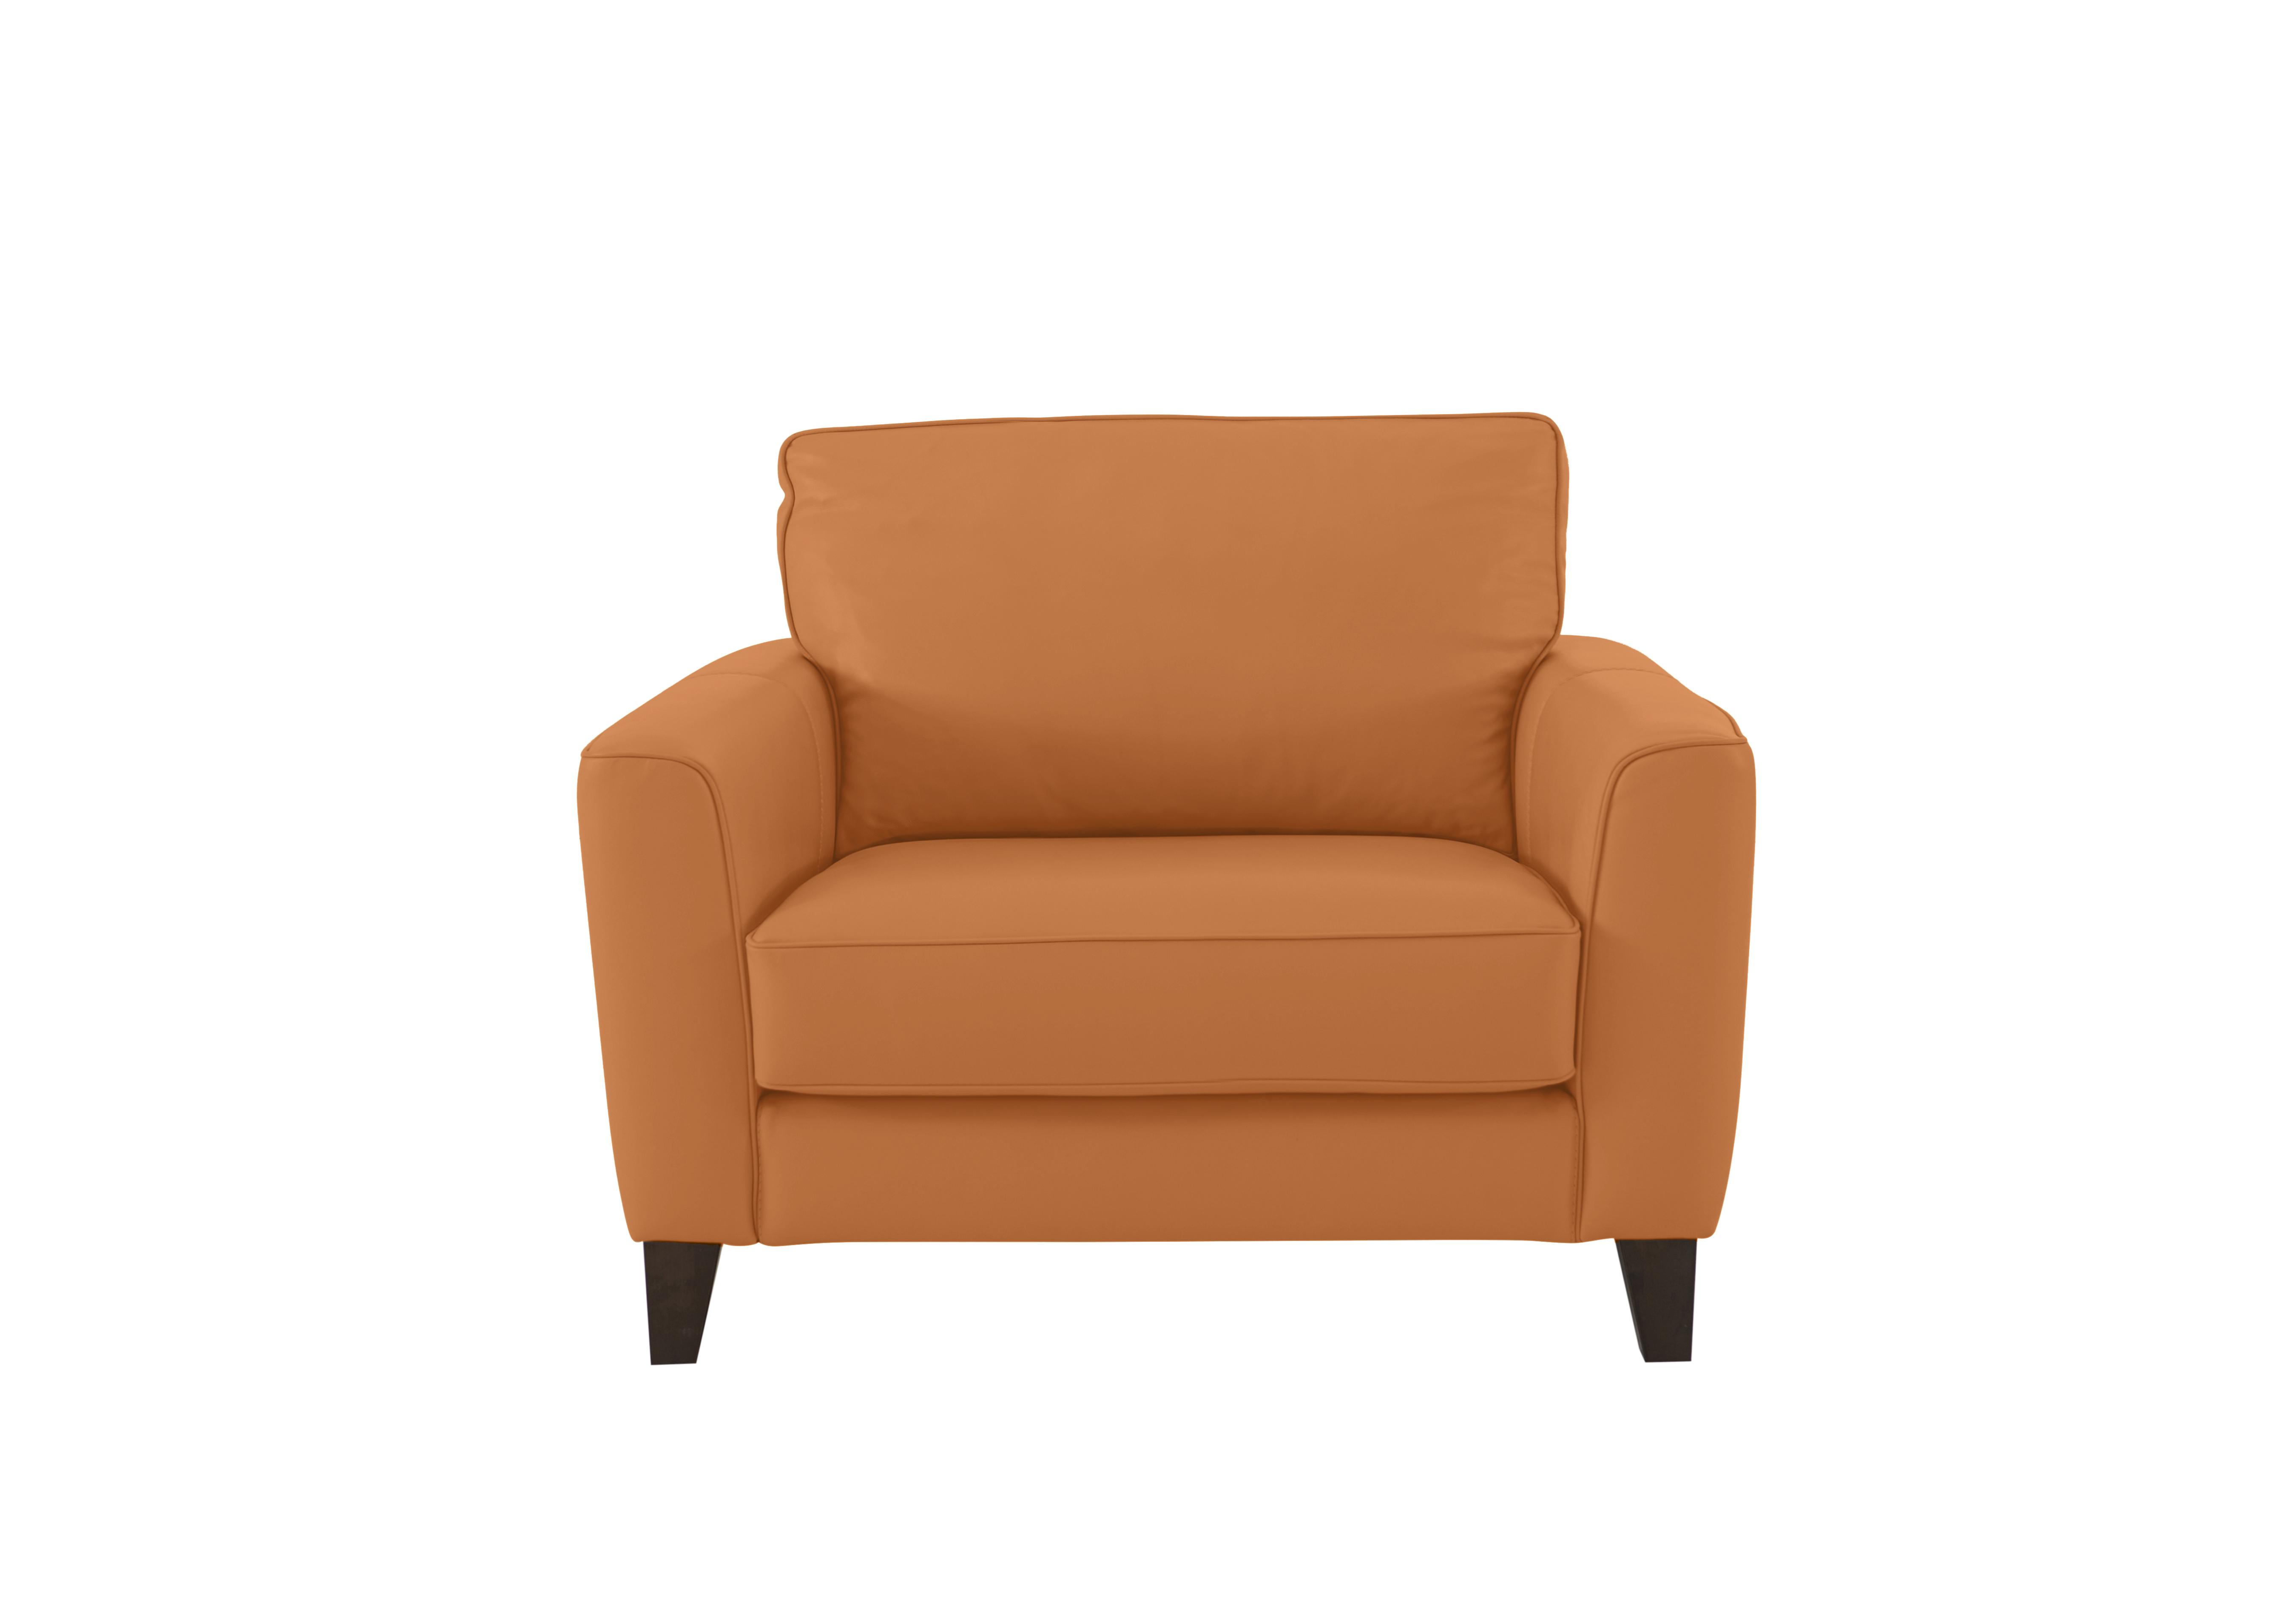 Brondby Leather Cuddle Chair in Bv-335e Honey Yellow on Furniture Village